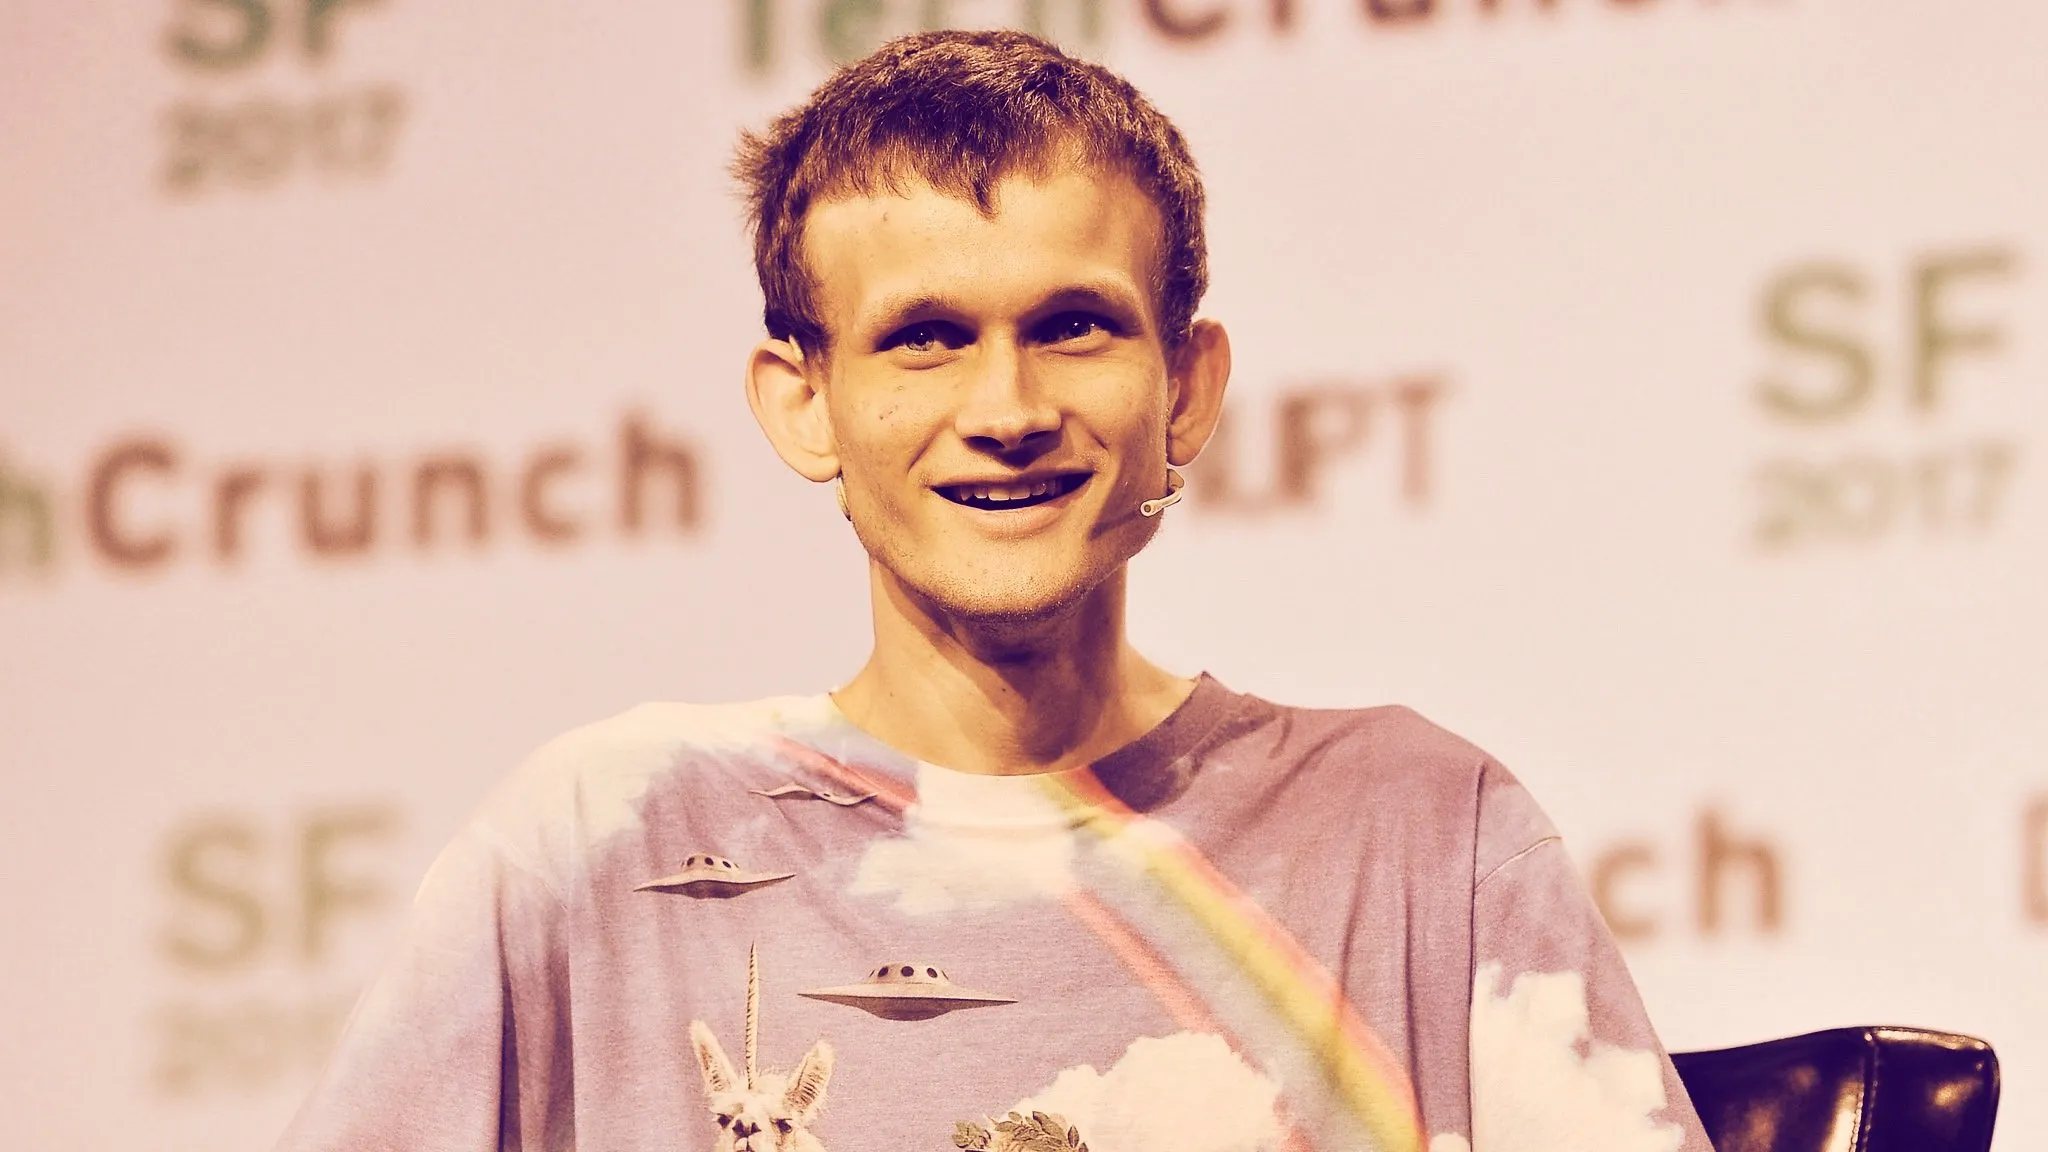 Vitalik Buterin is the co-founder of Ethereum. Image: Flickr